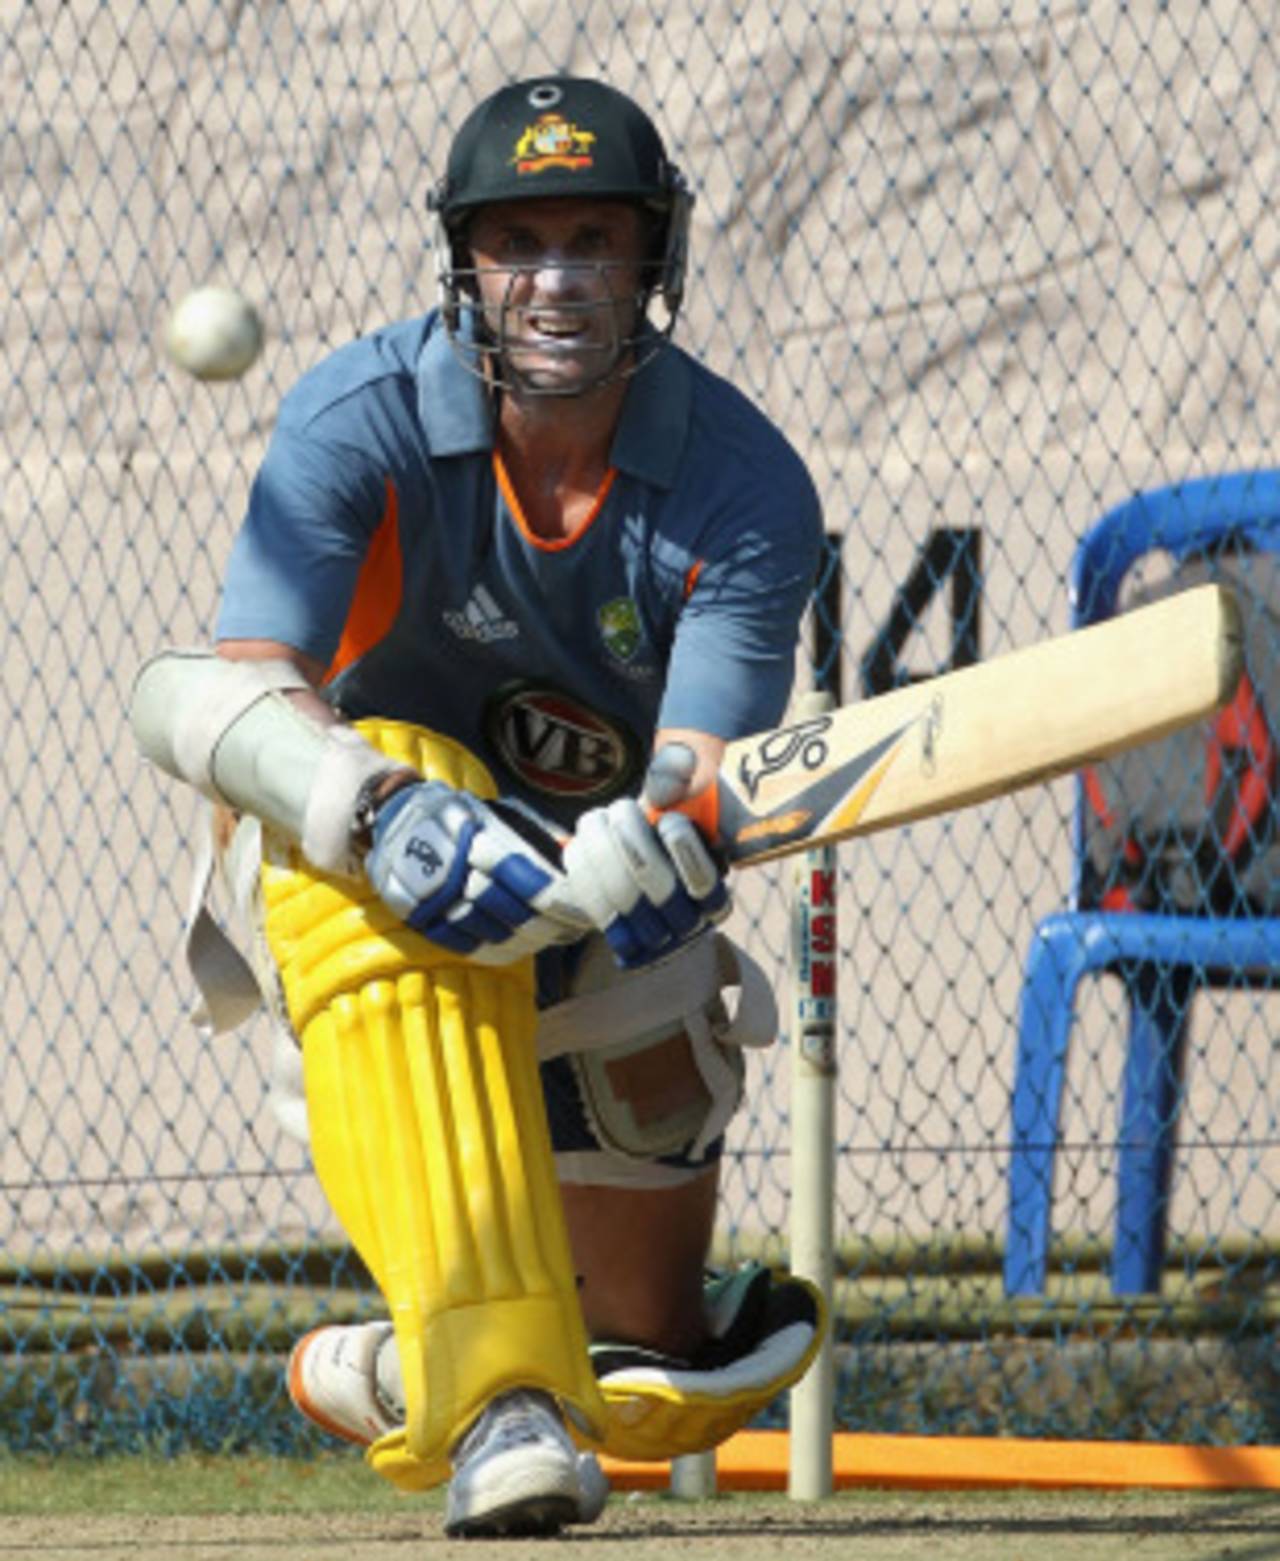 Michael Hussey had a bat in the nets, Bangalore, March 15, 2011